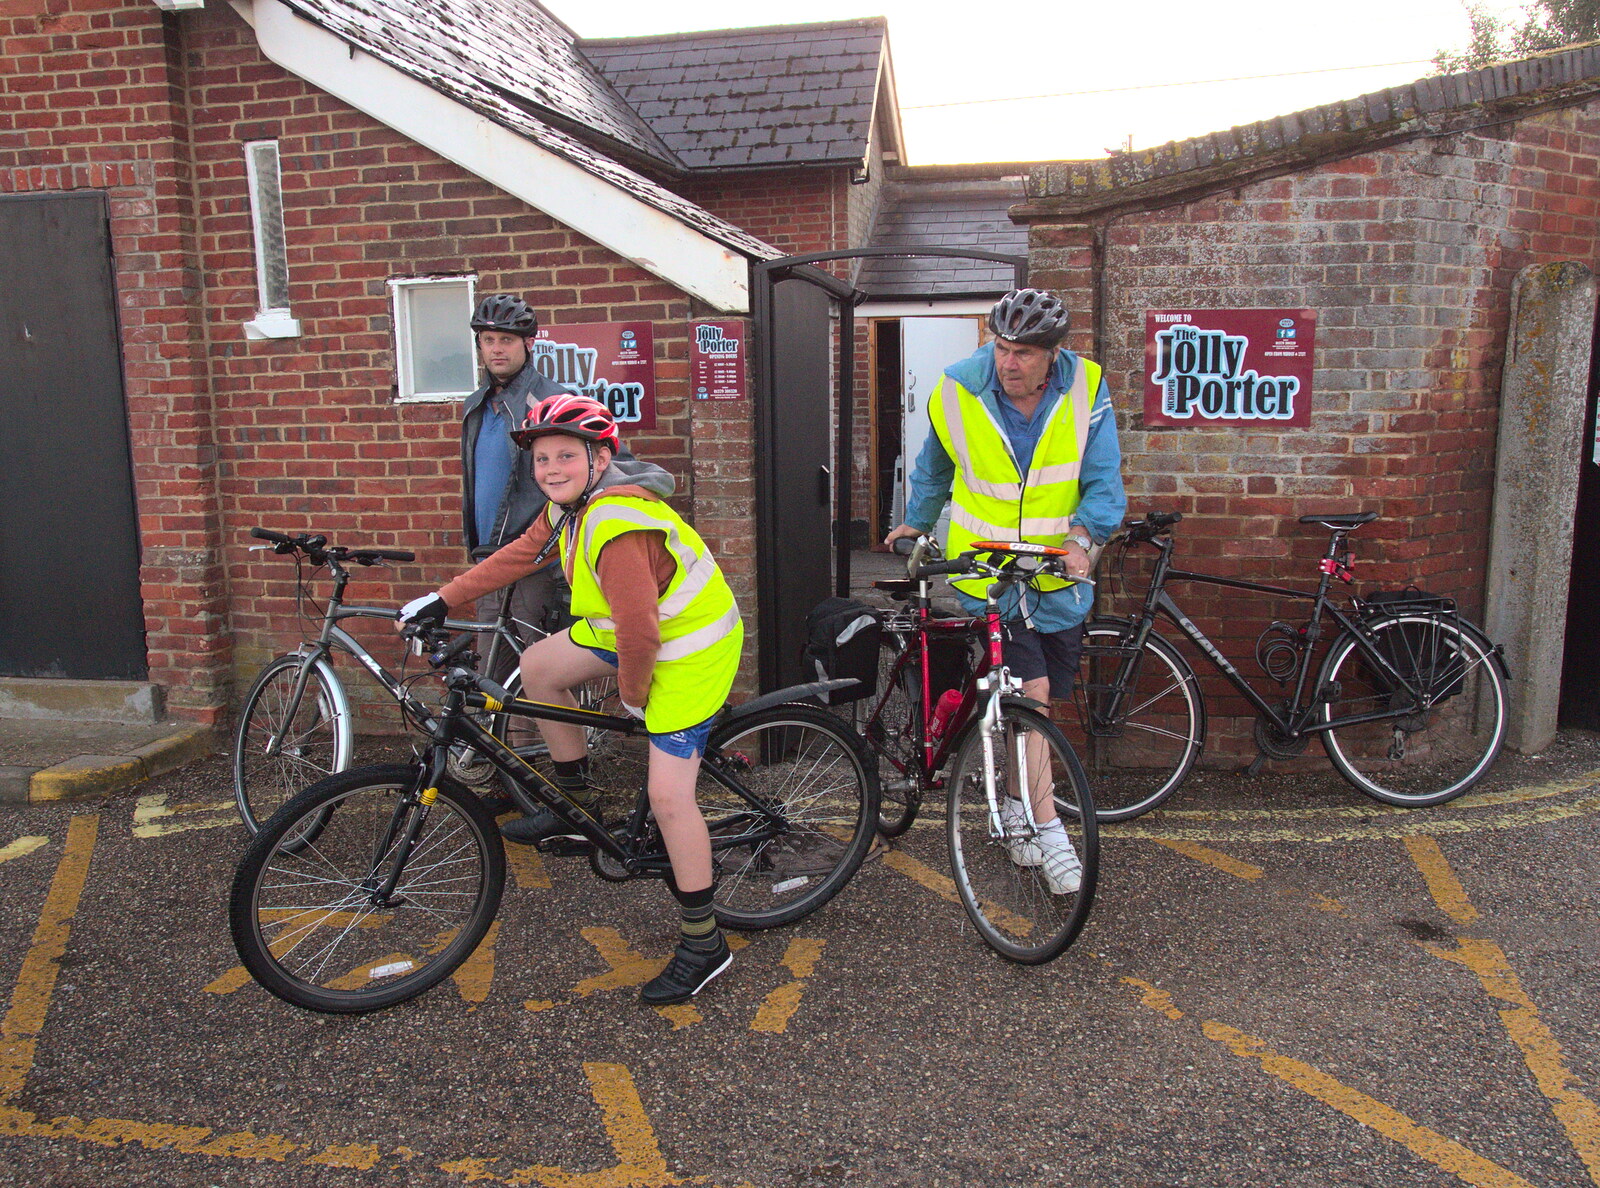 Paul, Matthew and Alan take to their bikes from The BSCC at the Jolly Porter, Station Road, Diss, Norfolk - 28th July 2016